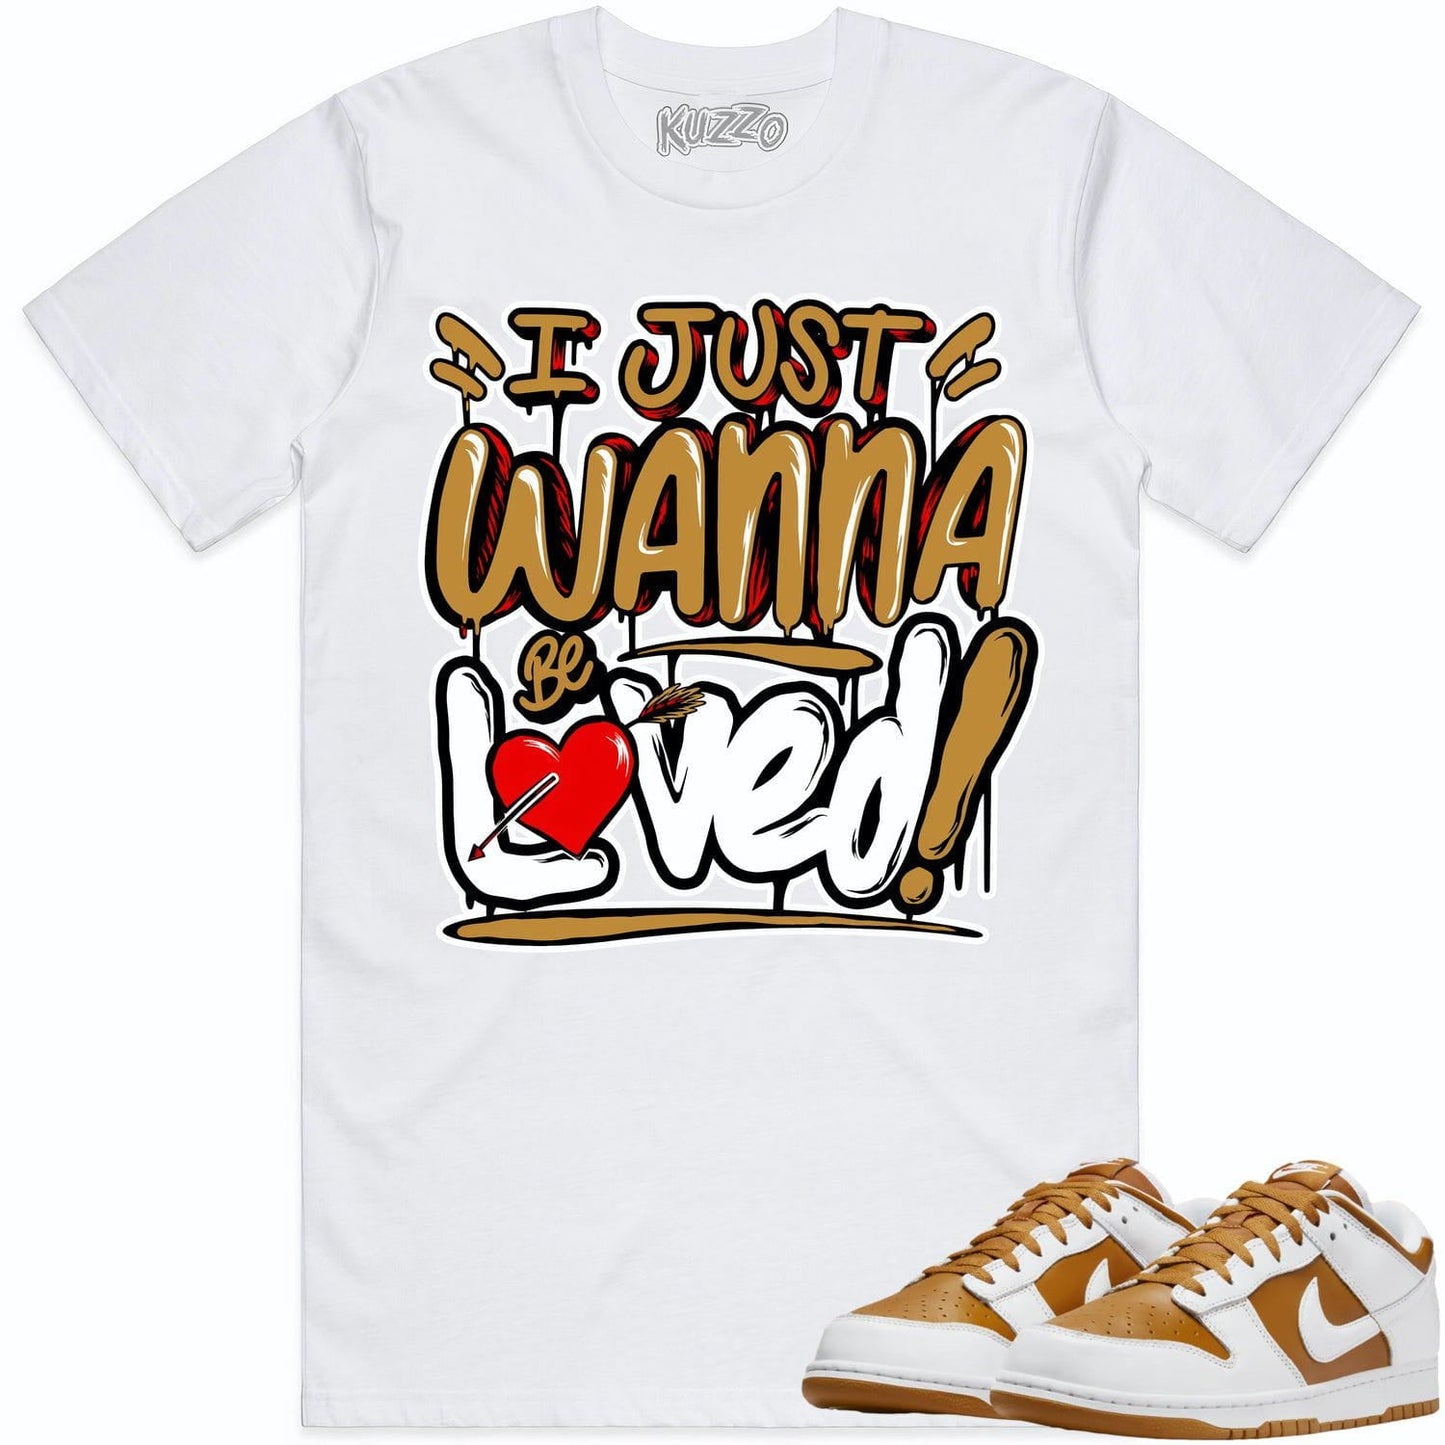 Curry Dunks Shirt - Curry Dunks Sneaker Tees - Wheat Loved